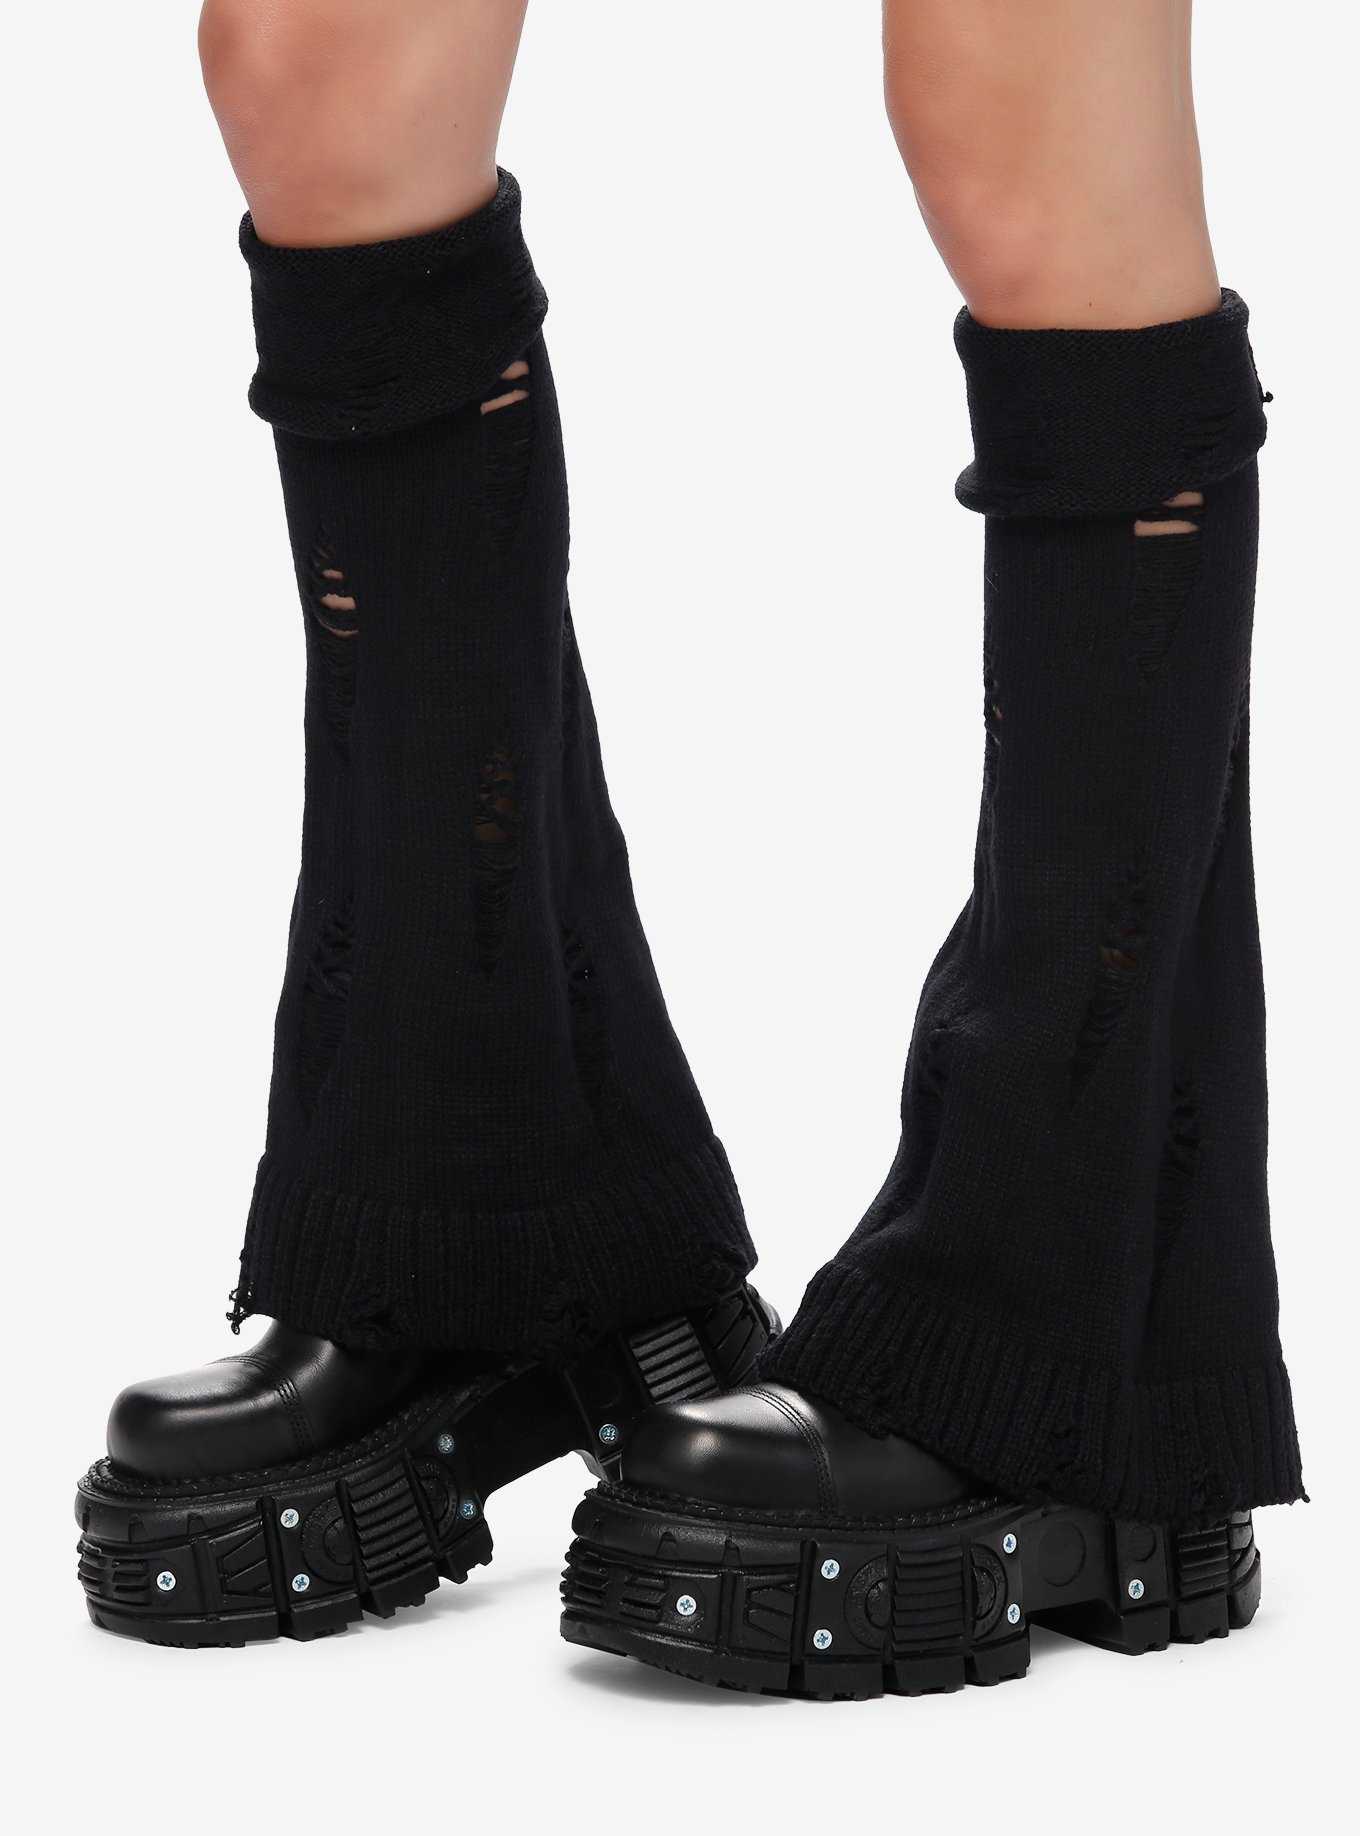 Cozy Outing Waffle Knit Leg Warmers In Black • Impressions Online